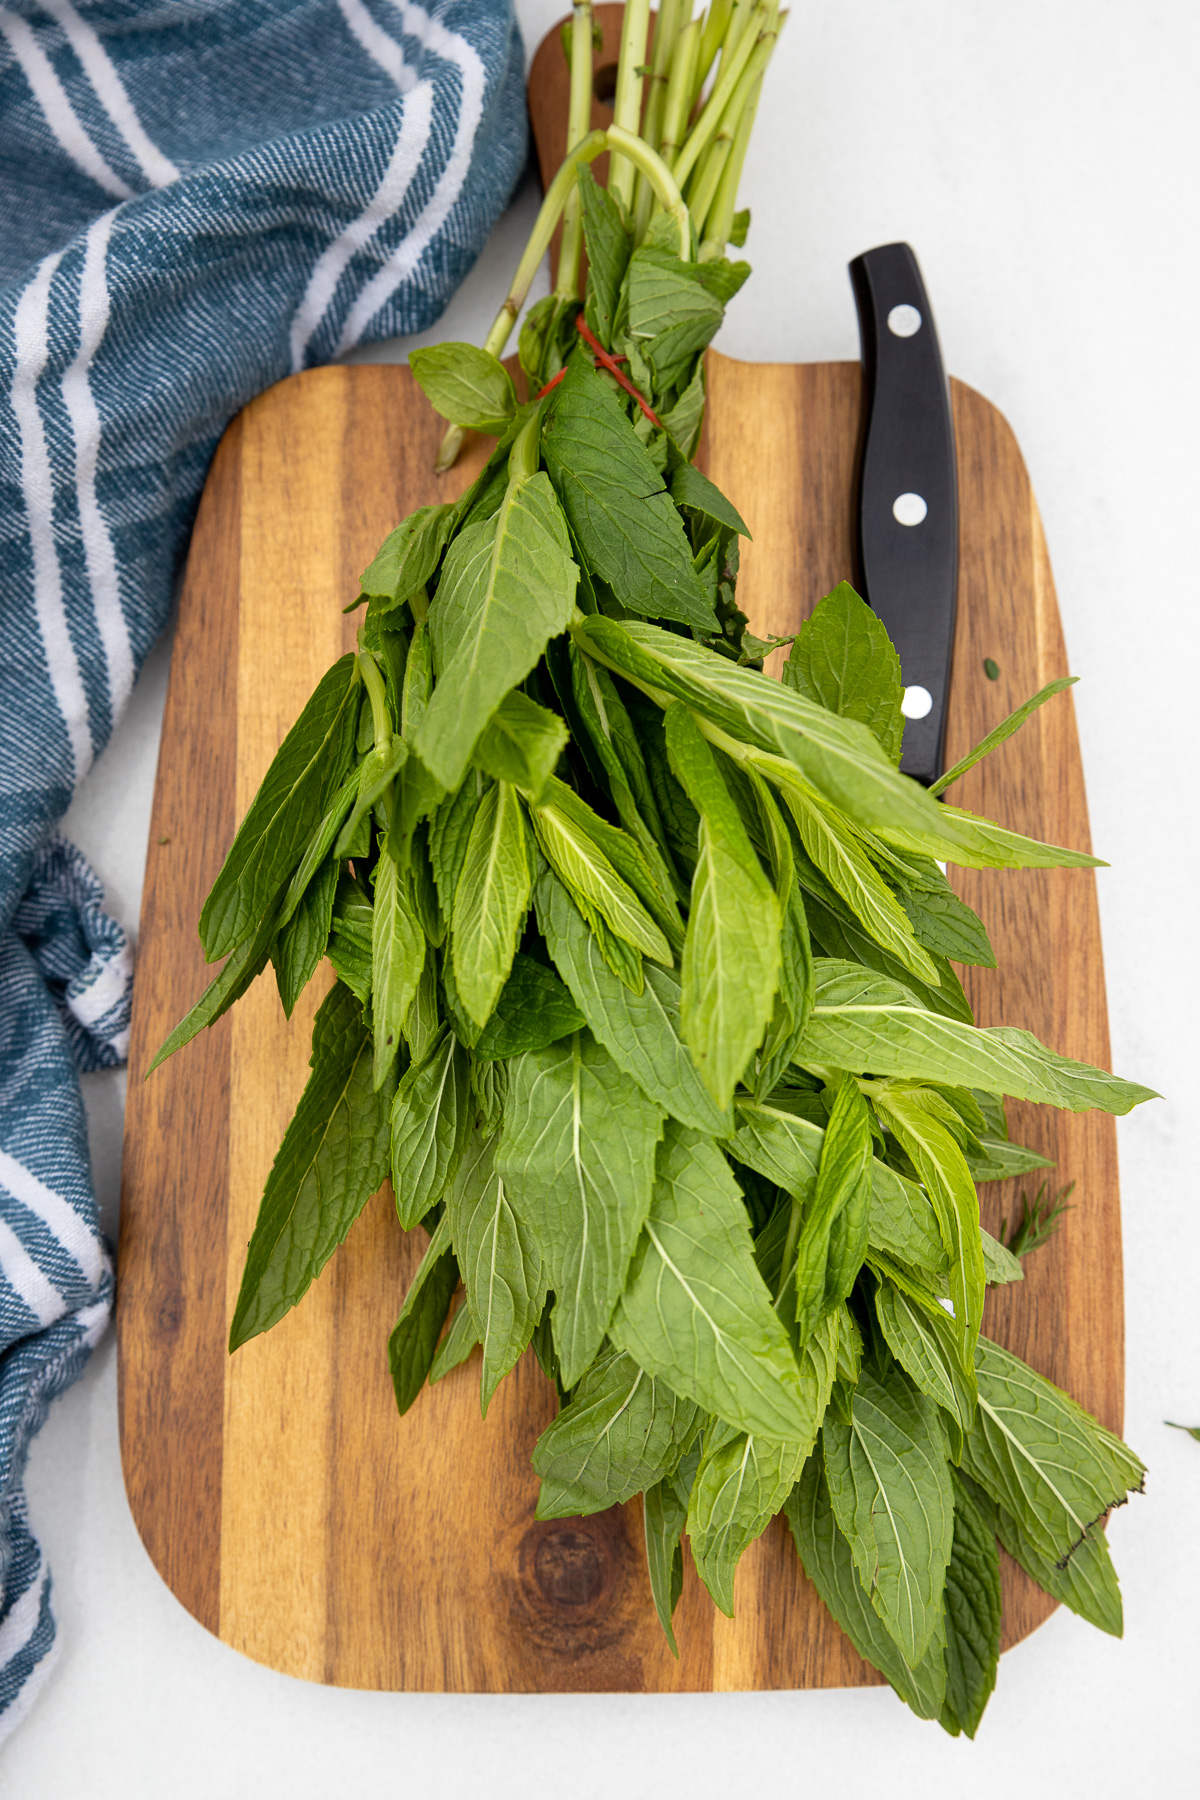 A bunch of fresh mint on a wooden chopping board on a white background with a blue and white striped tea towel to the left.